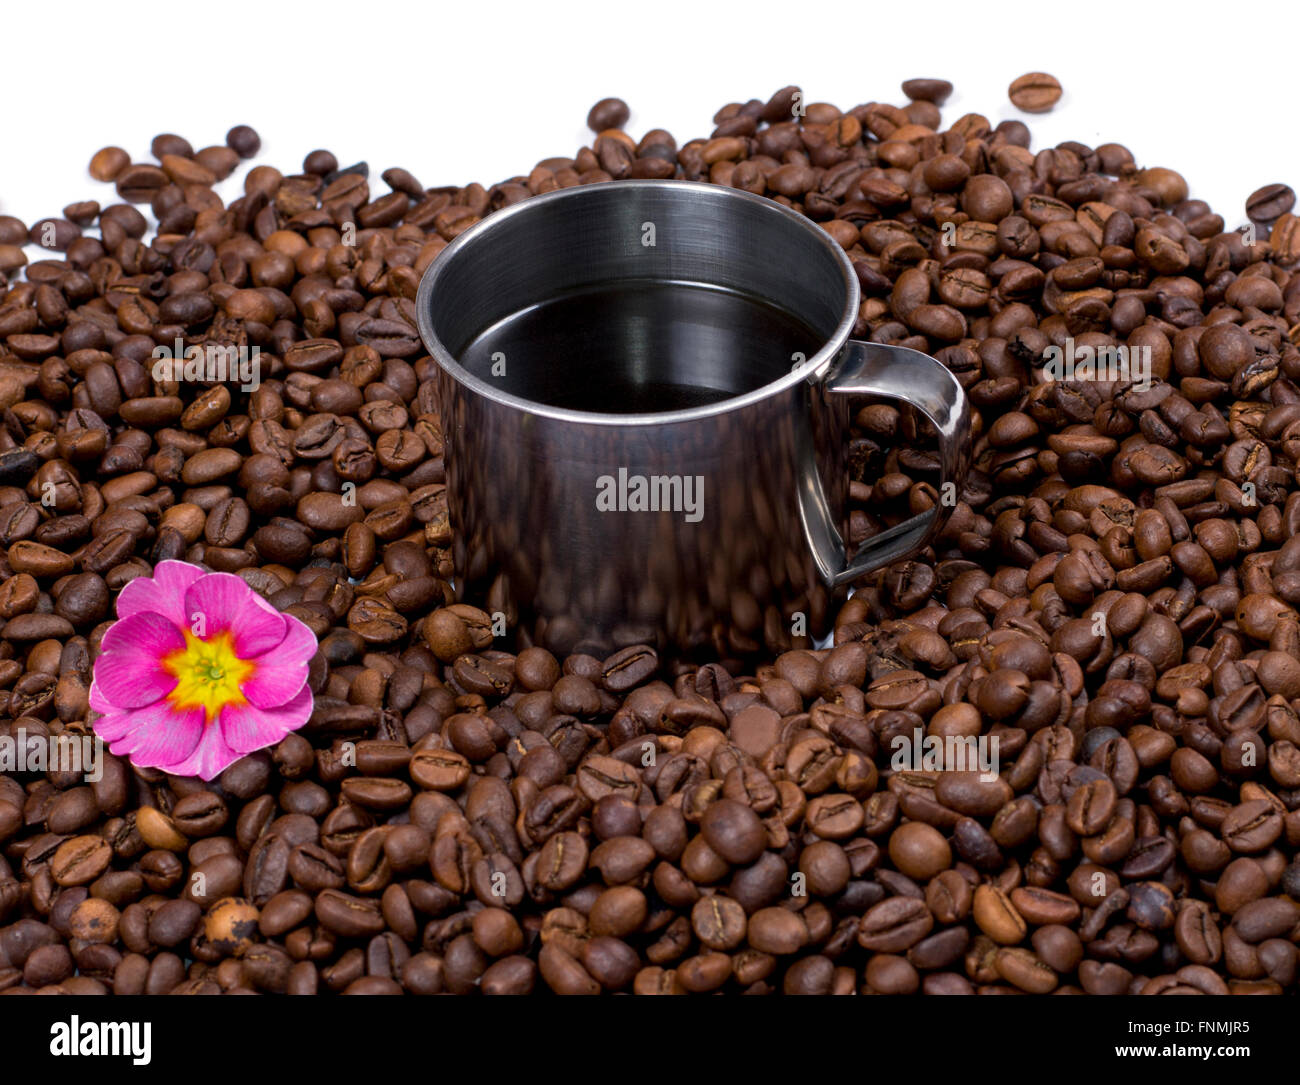 flower and steel cup of coffee in coffee grains Stock Photo